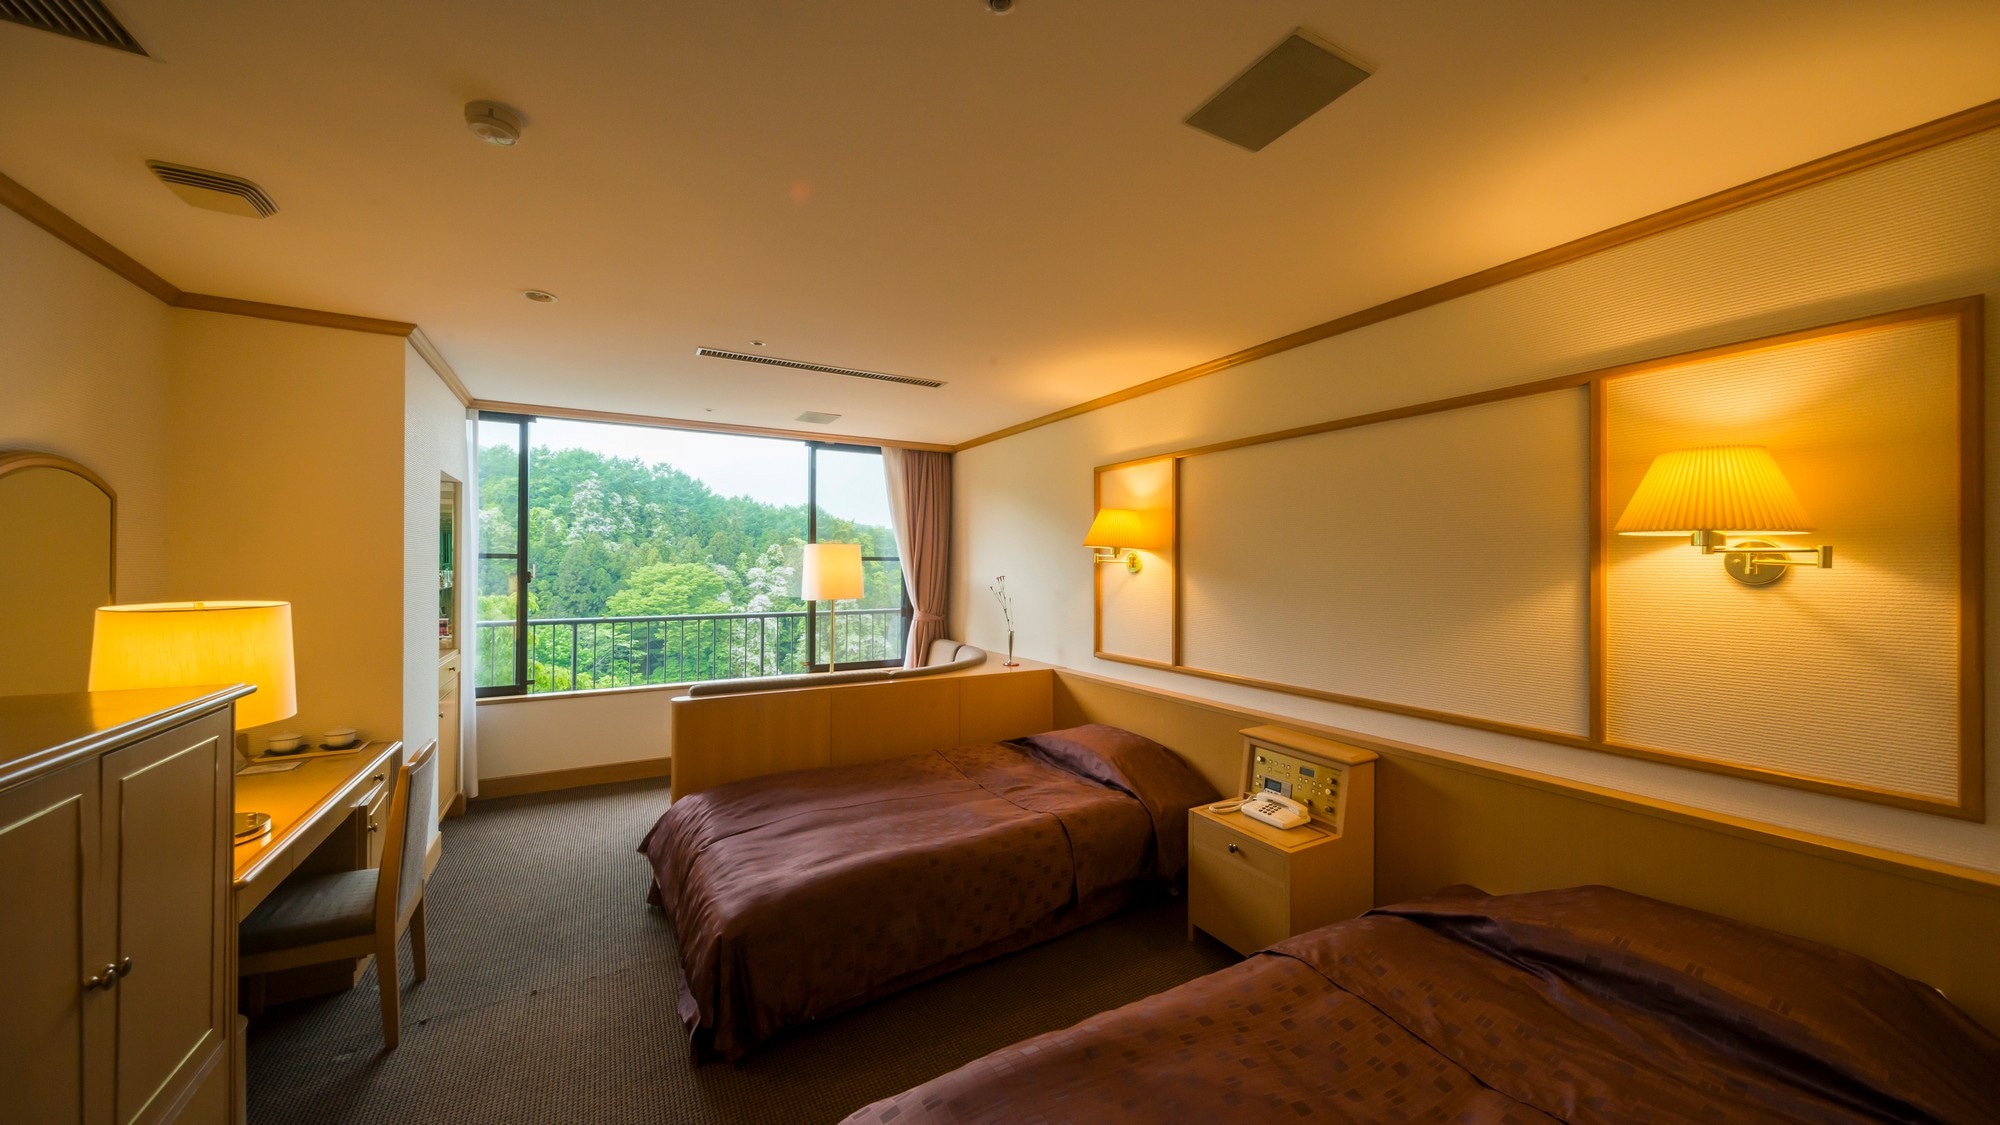 Quiet annex "Kotohogi" twin bedroom with a calm atmosphere